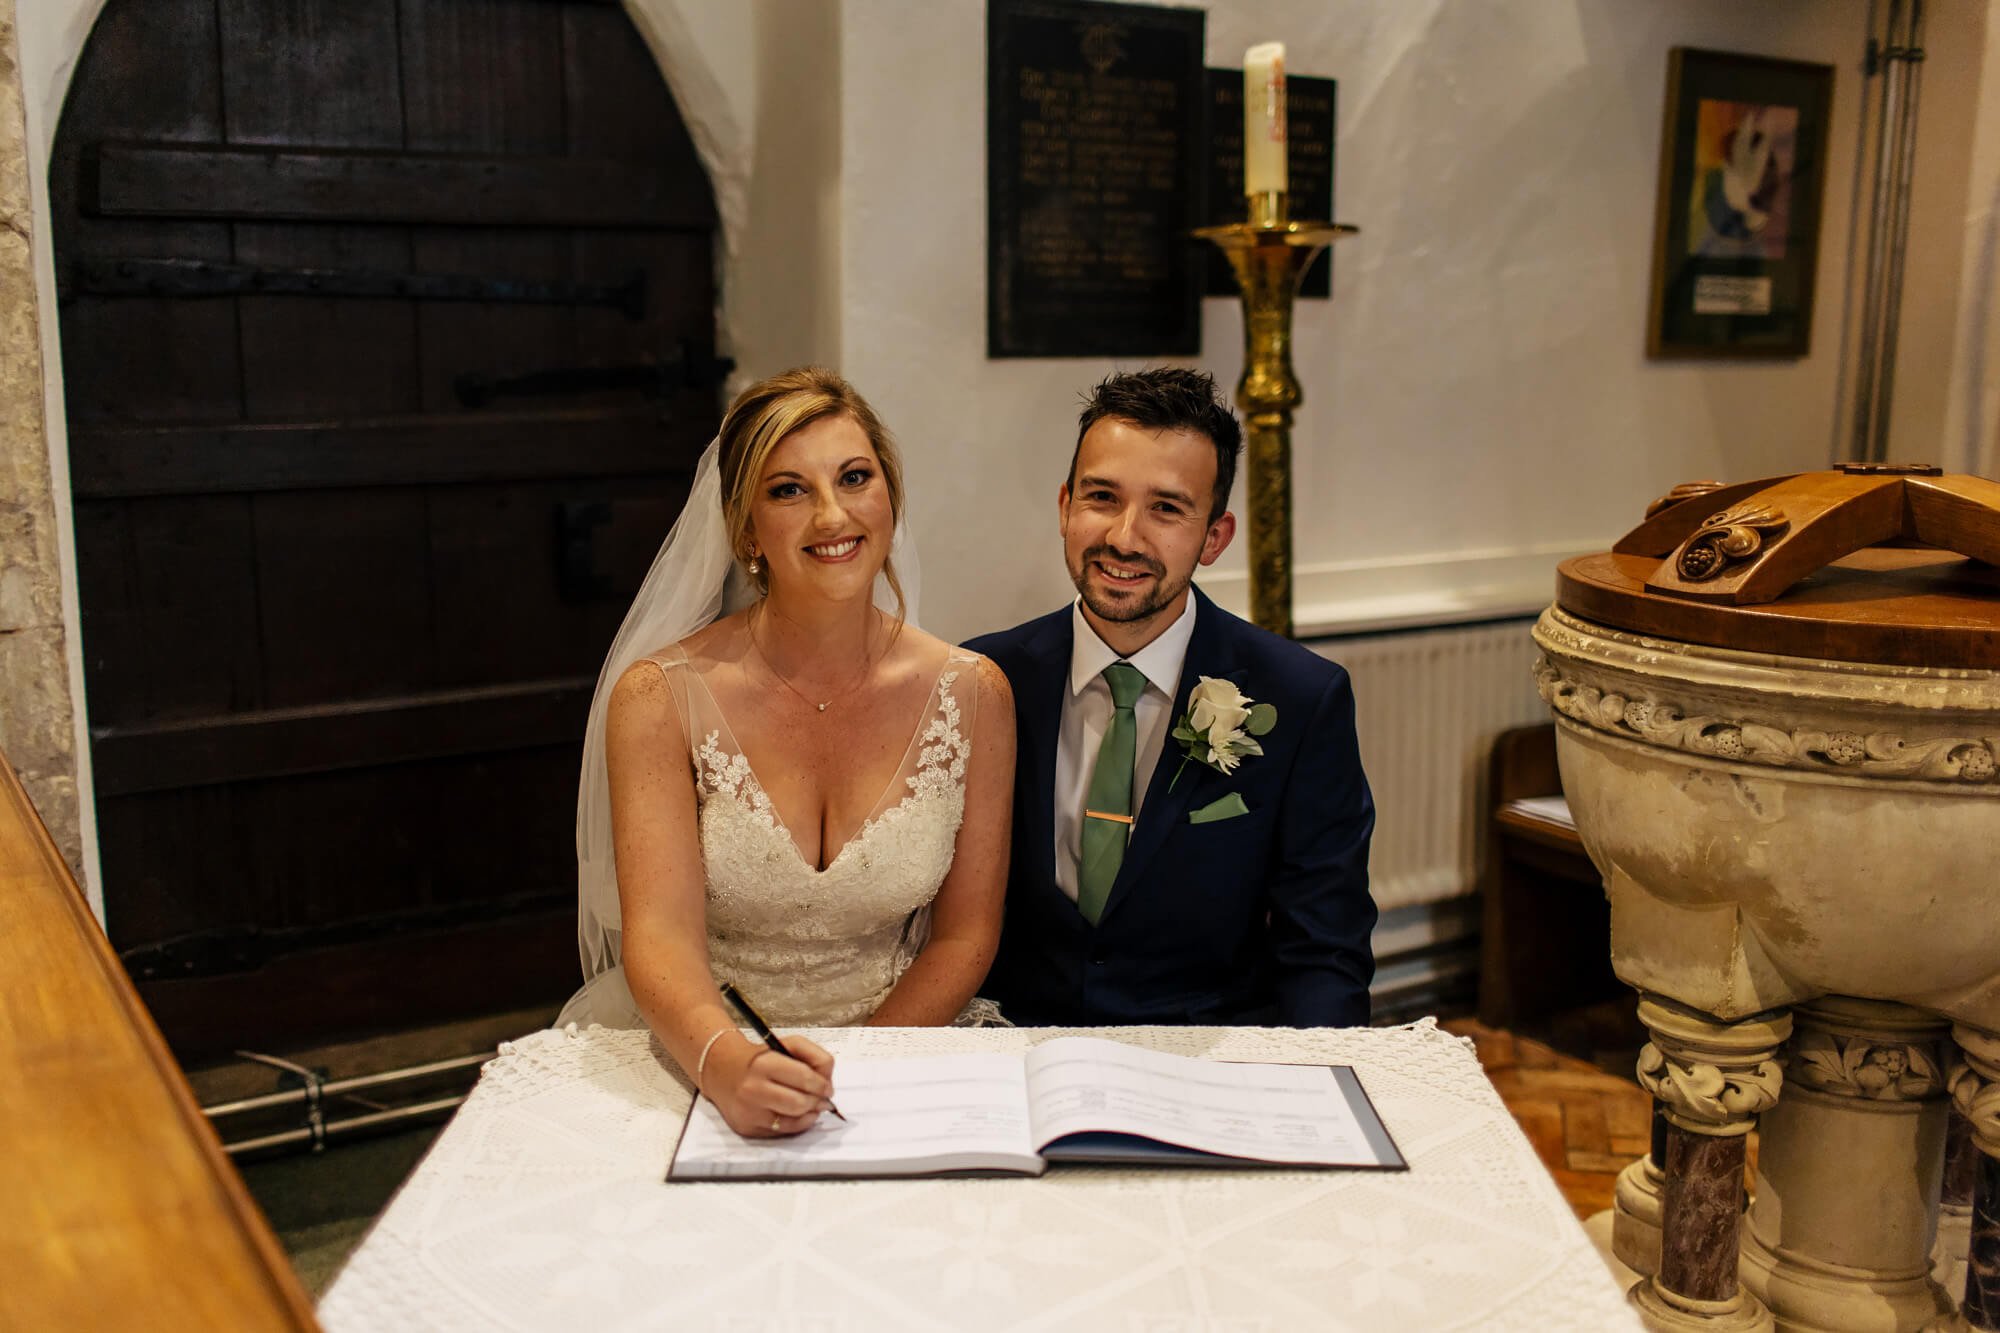 Bride and groom signing the register at their wedding